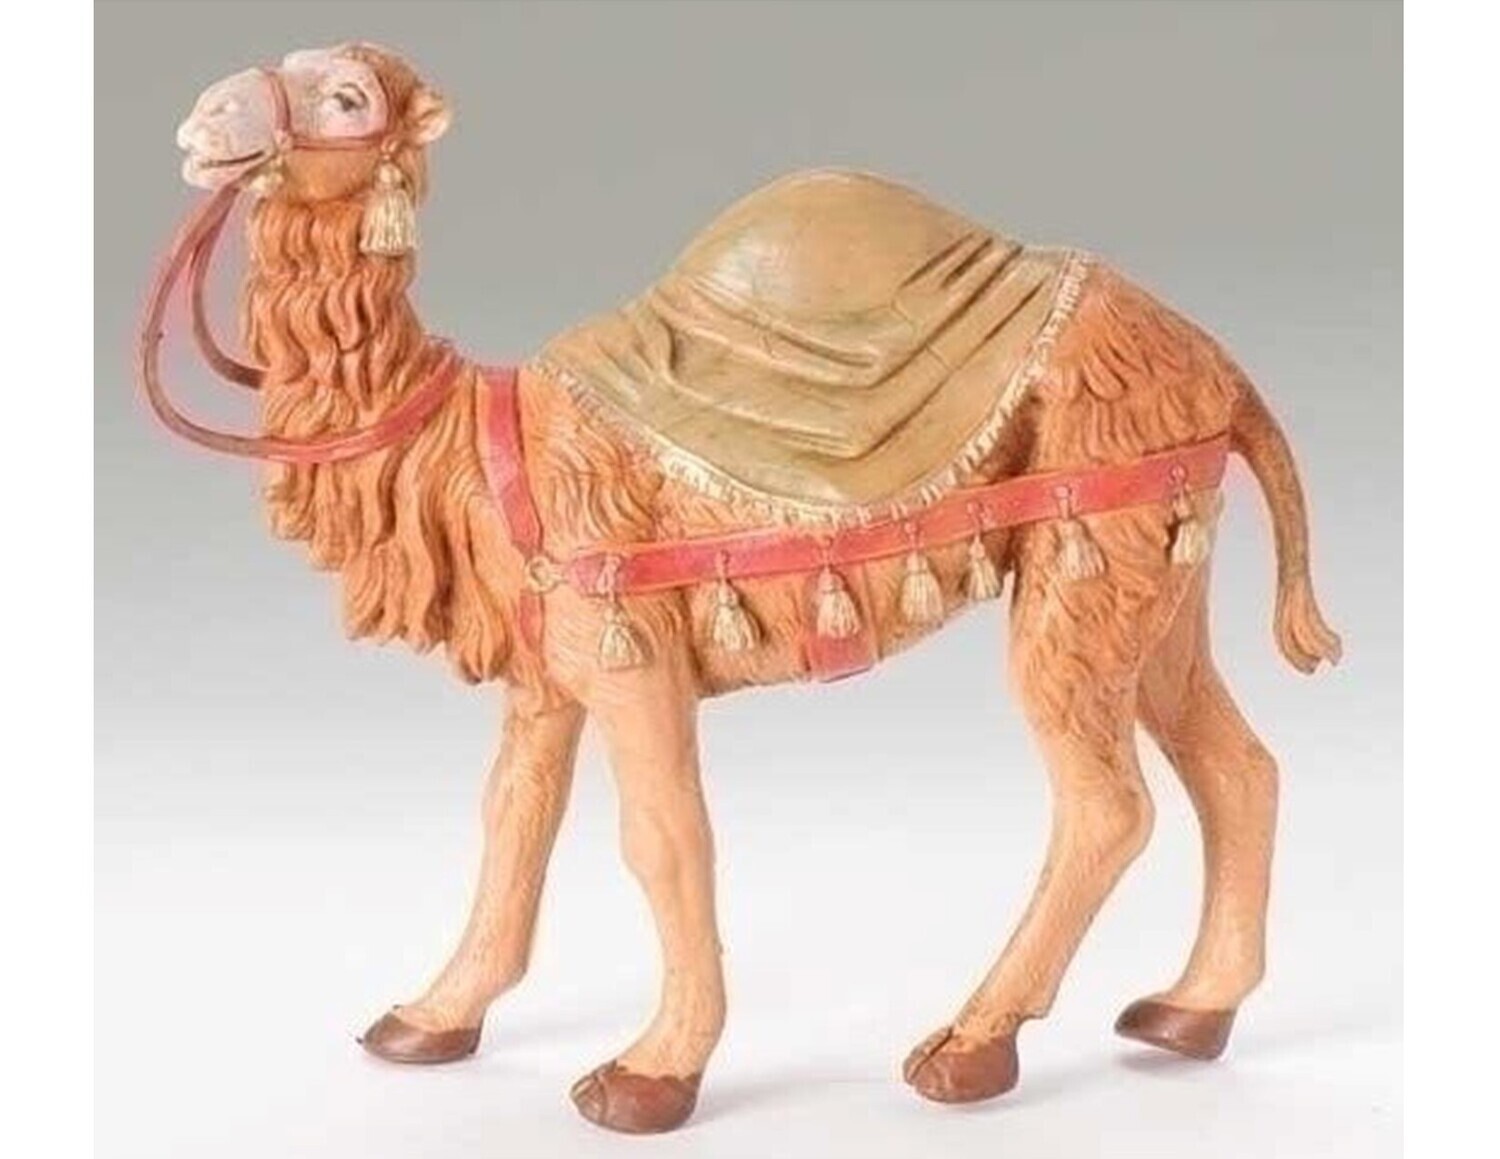 Fontanini Nativity 5" Scale "Standing Camel with Saddle Blanket" (72526)